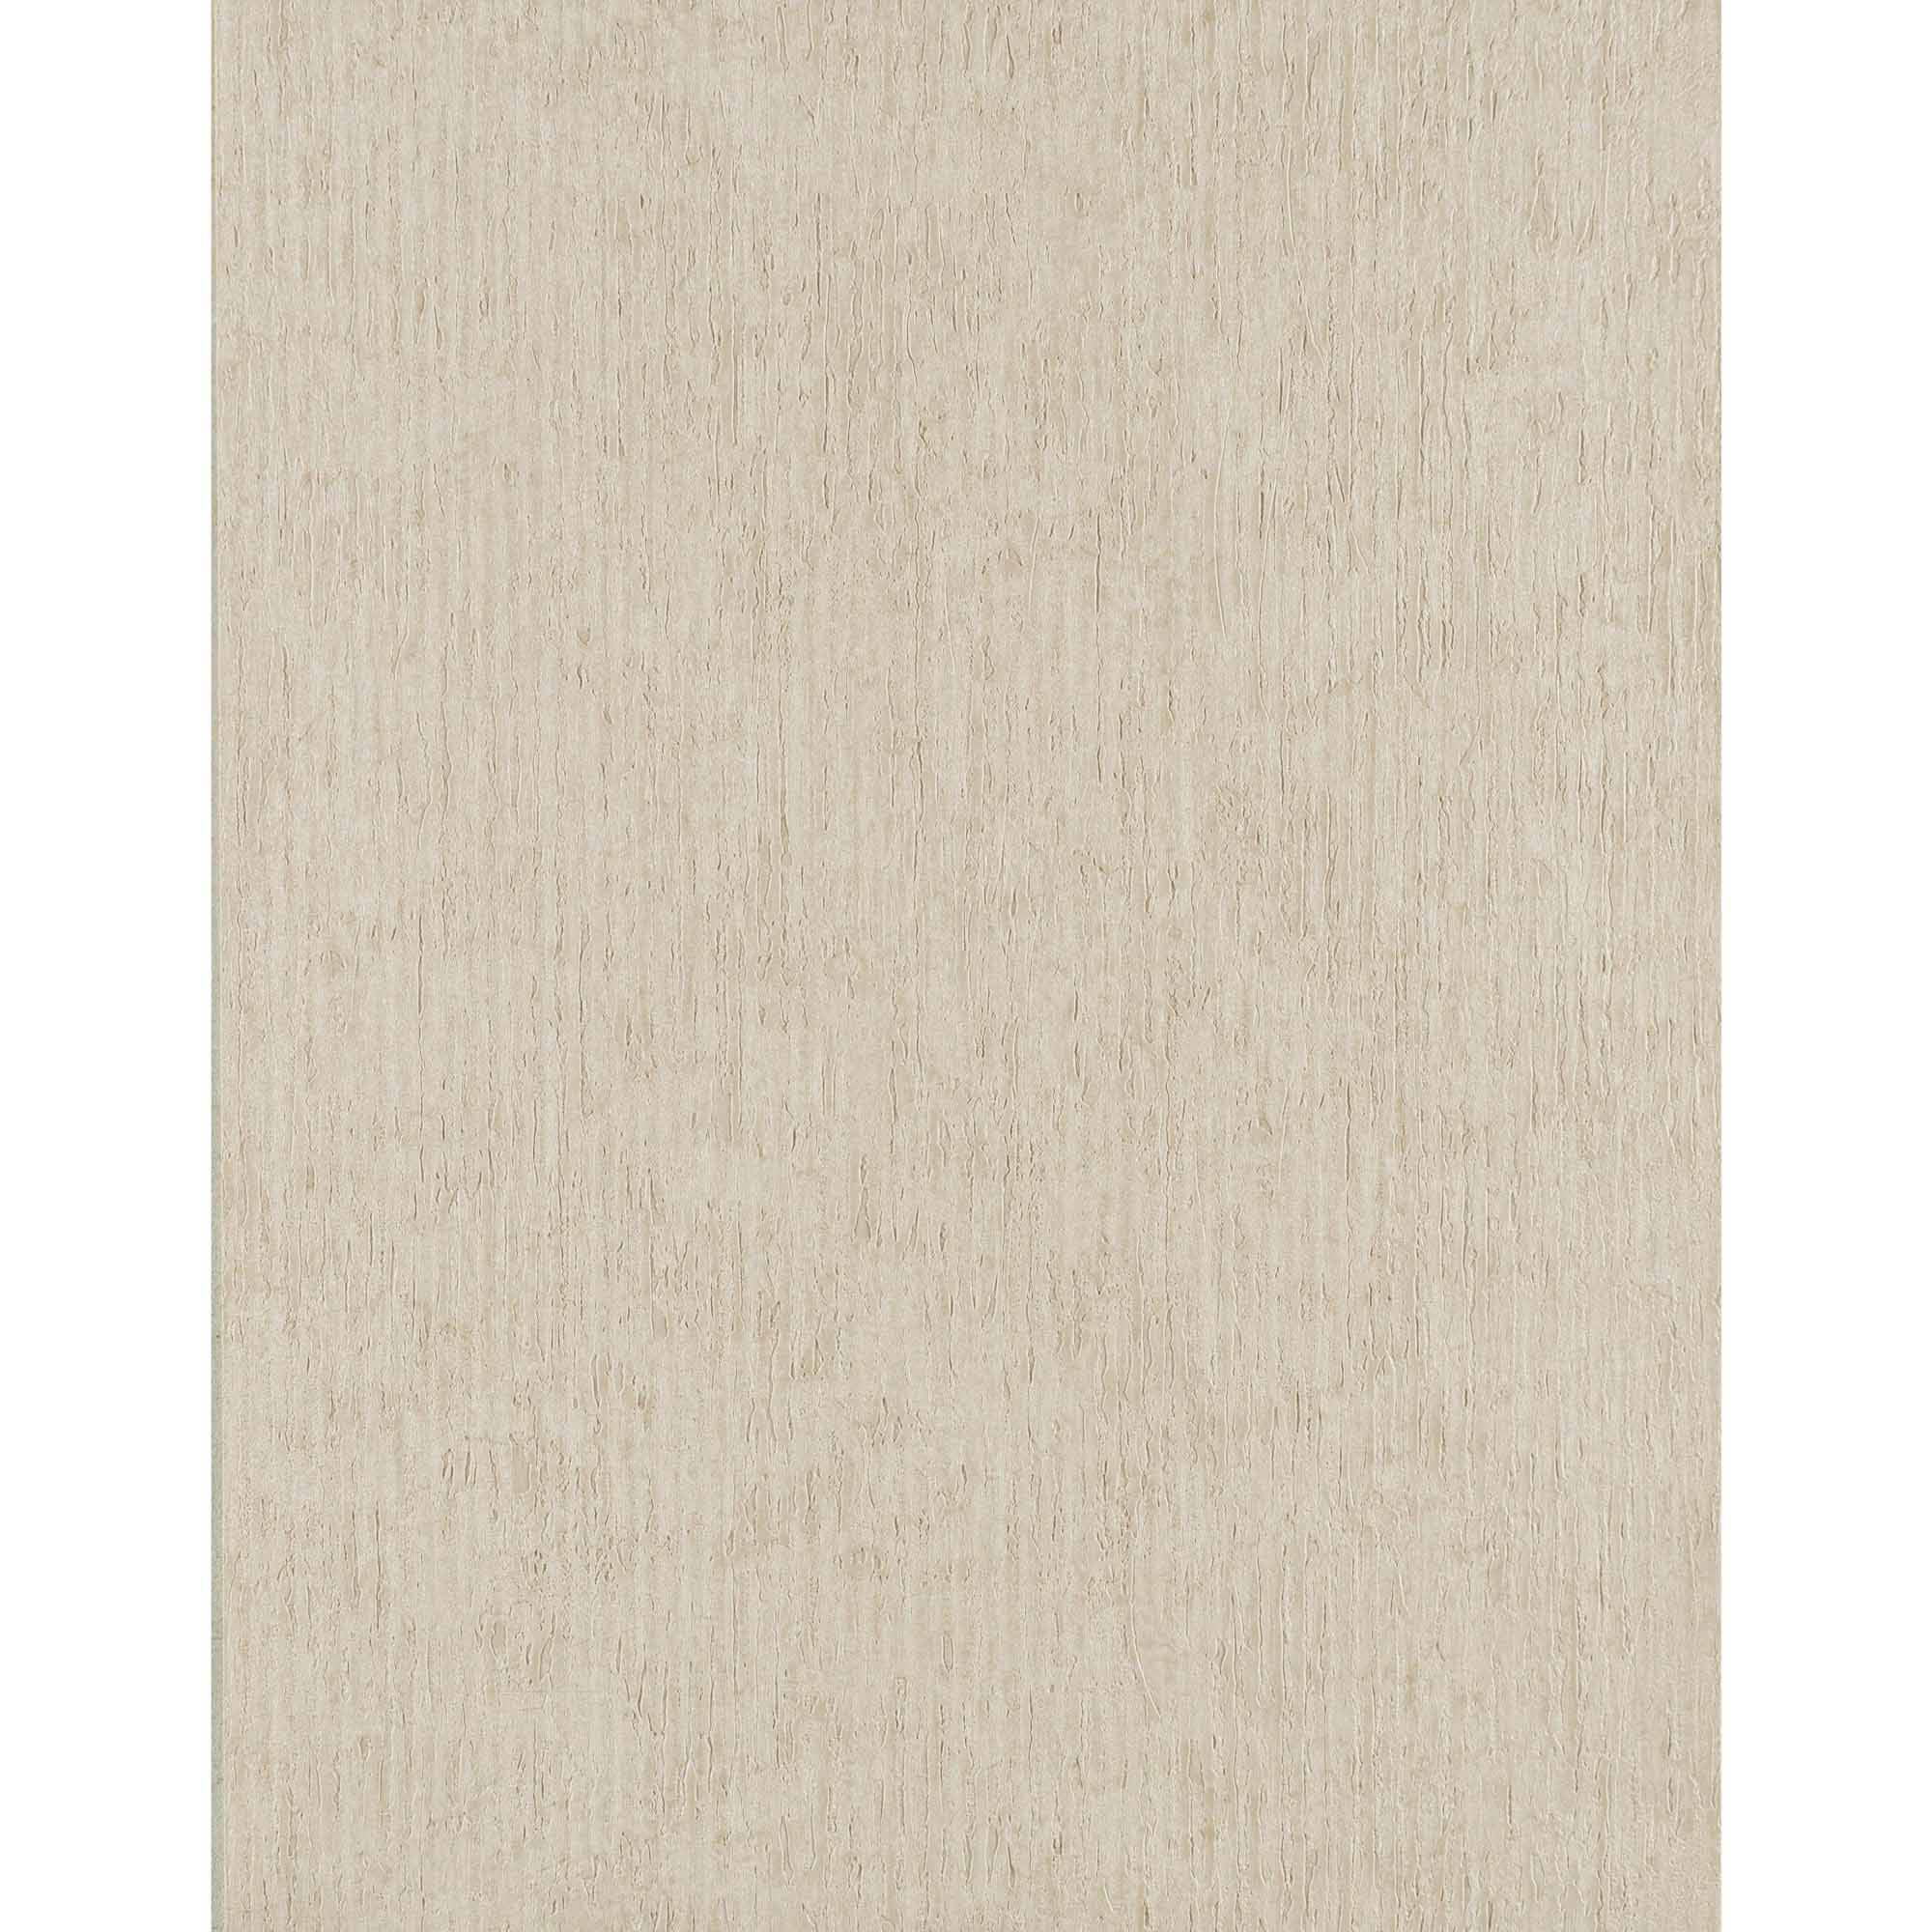 Weathered Finishes Cement Wallpaper - Walmart.com